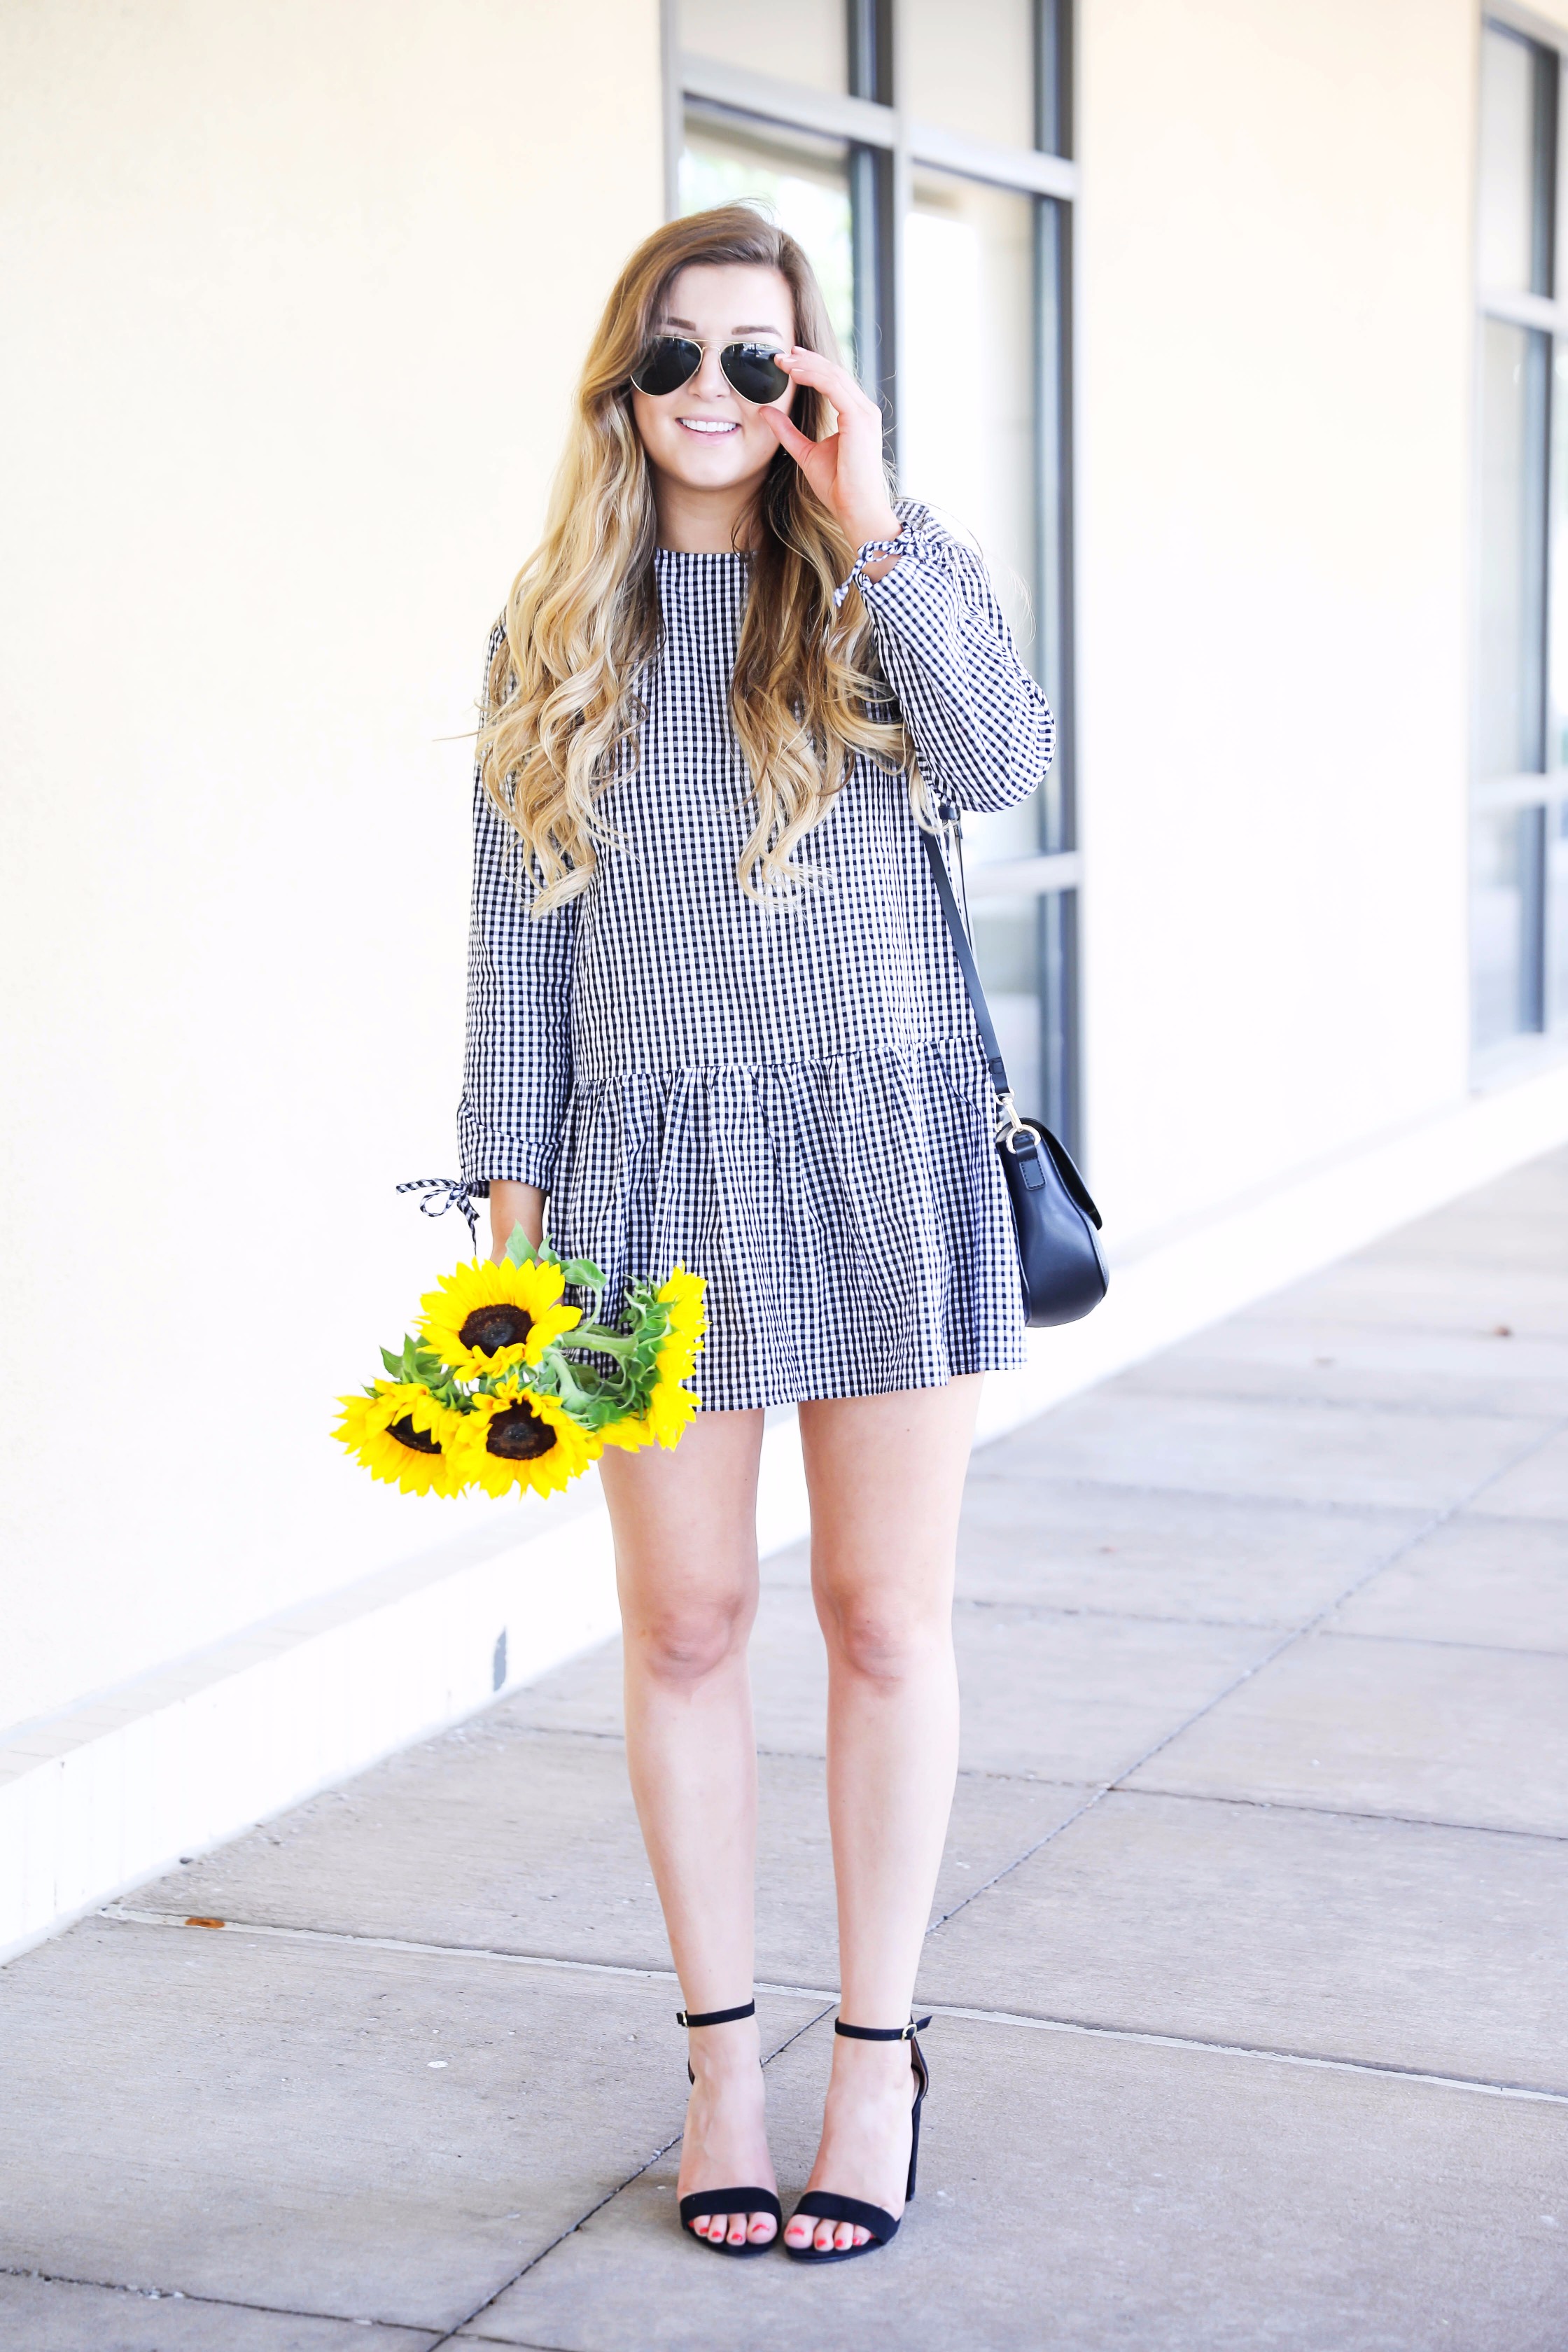 Sunflowers and gingham! The cutest low waist dress for summer transiting into fall. I can't get enough of this cute gingham dress! More details on fashion blog daily dose of charm by lauren lindmark